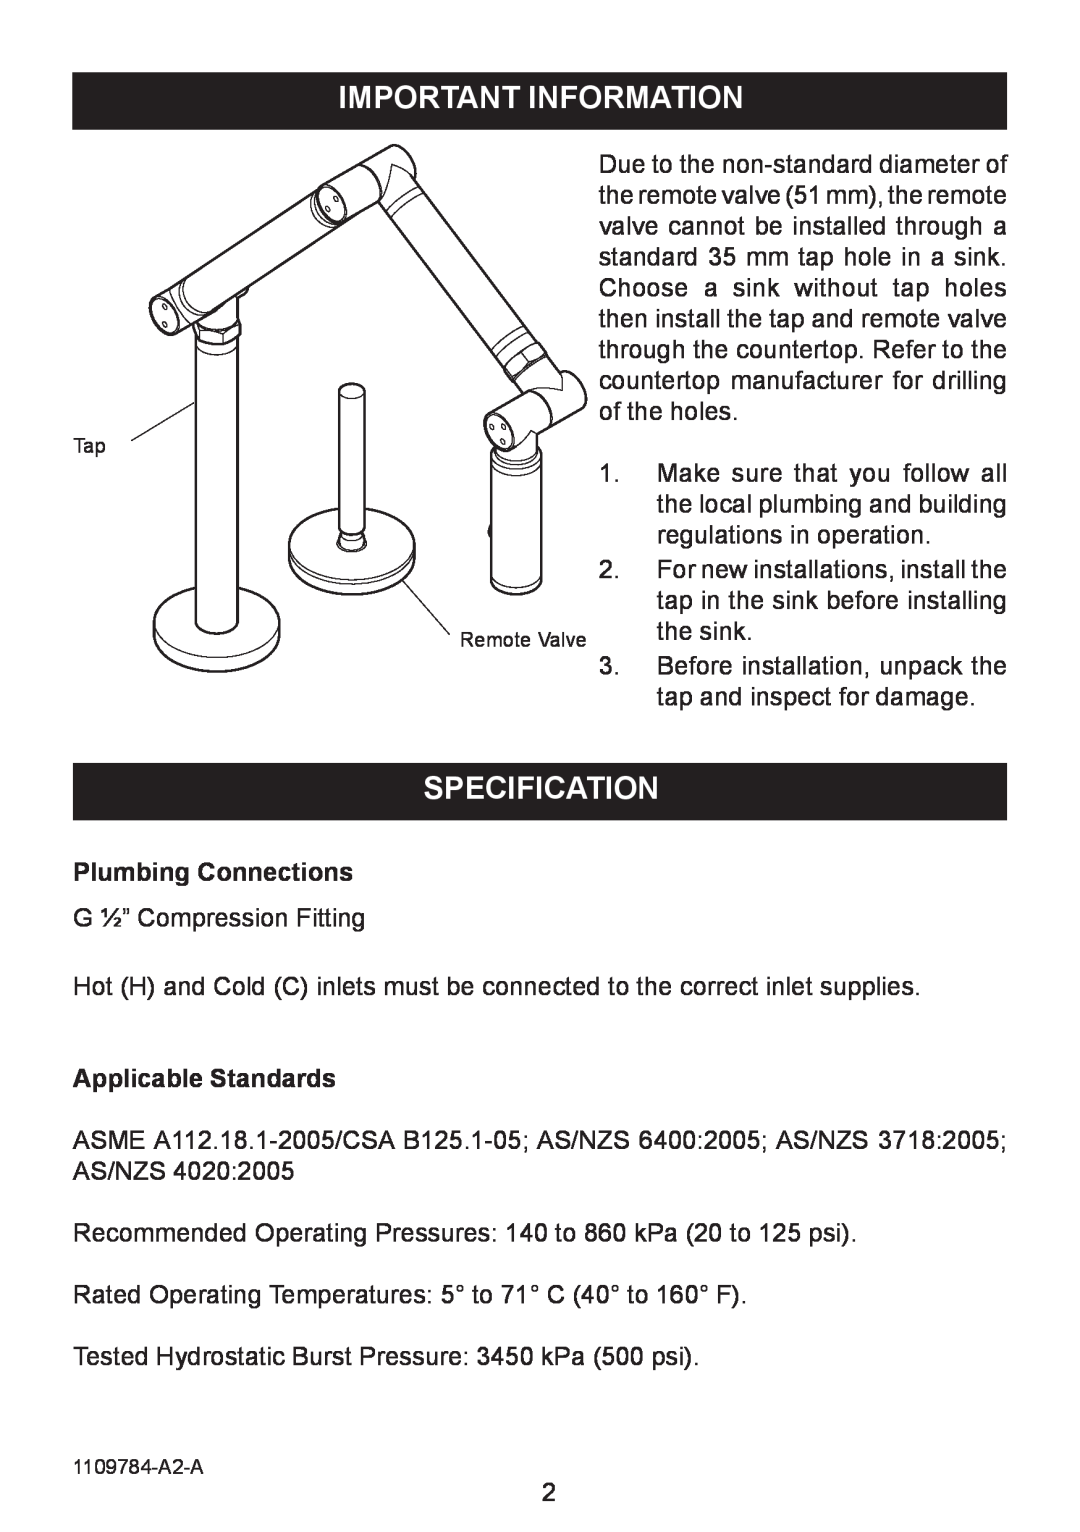 Kohler K-6227A manual important information, specification, Plumbing Connections, Applicable Standards 